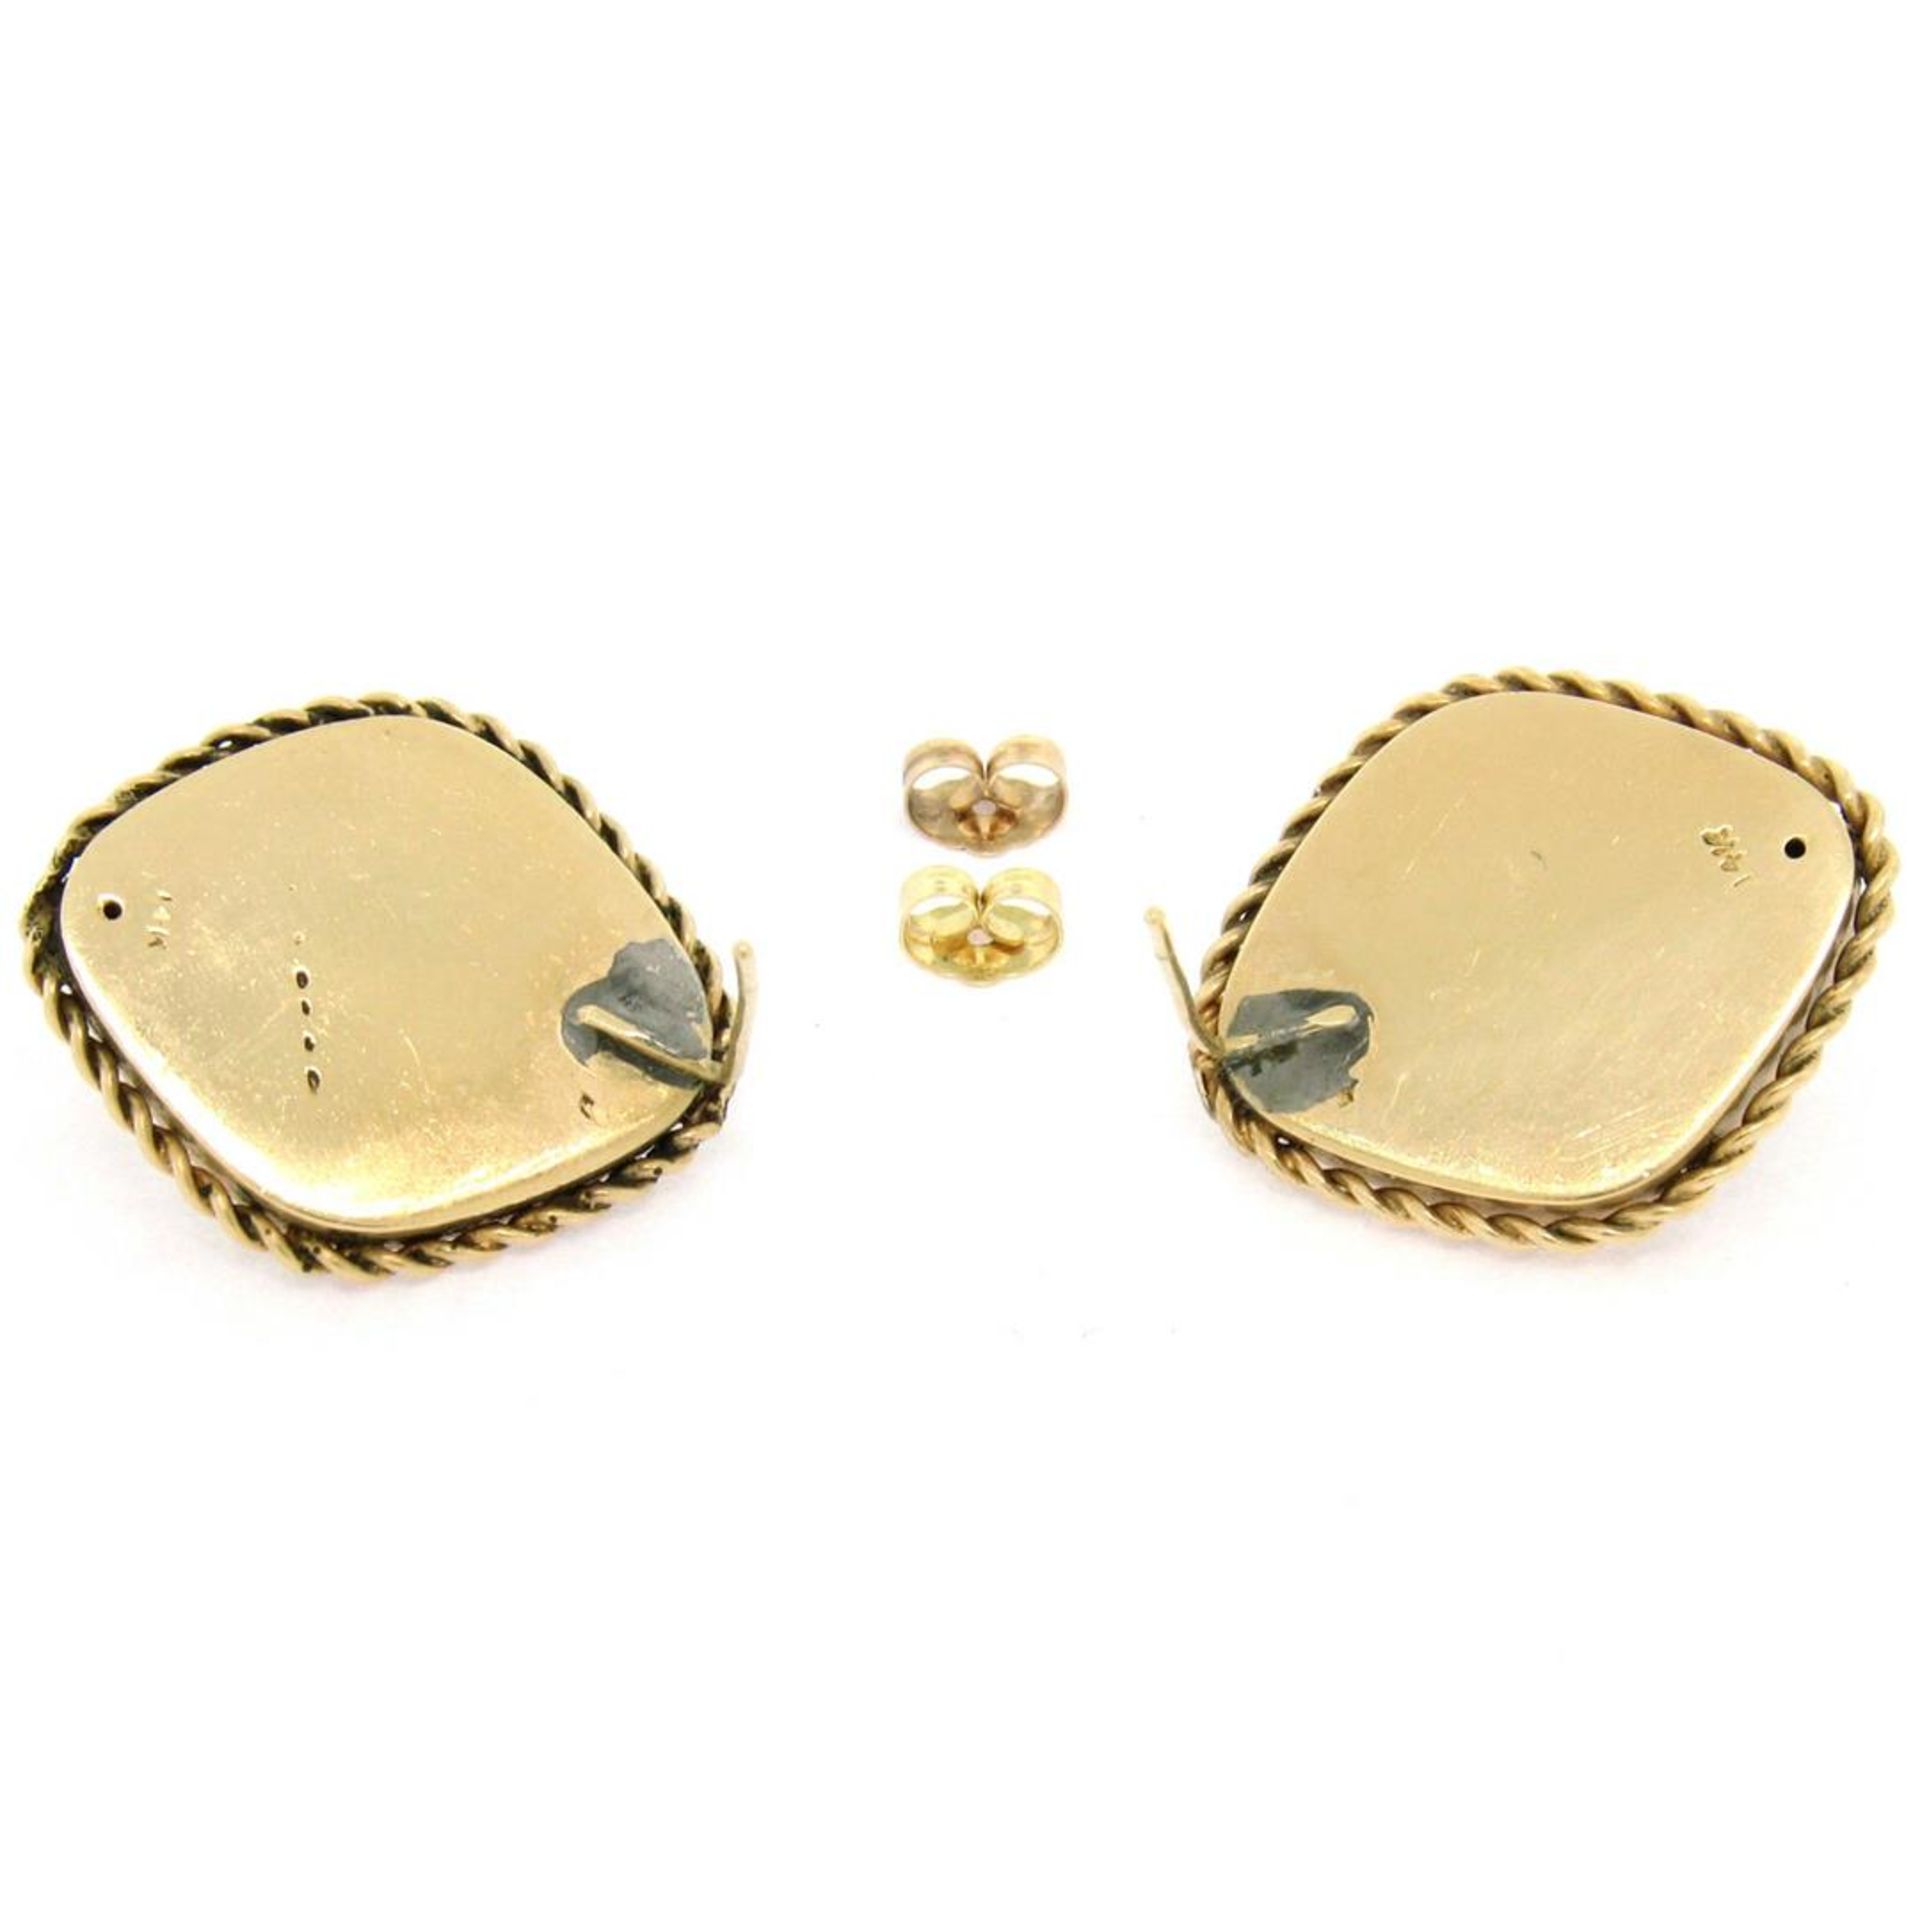 Antique Victorian 14K Gold Seed Pearl & Black Enamel Marquise Panel Earrings - Image 4 of 5